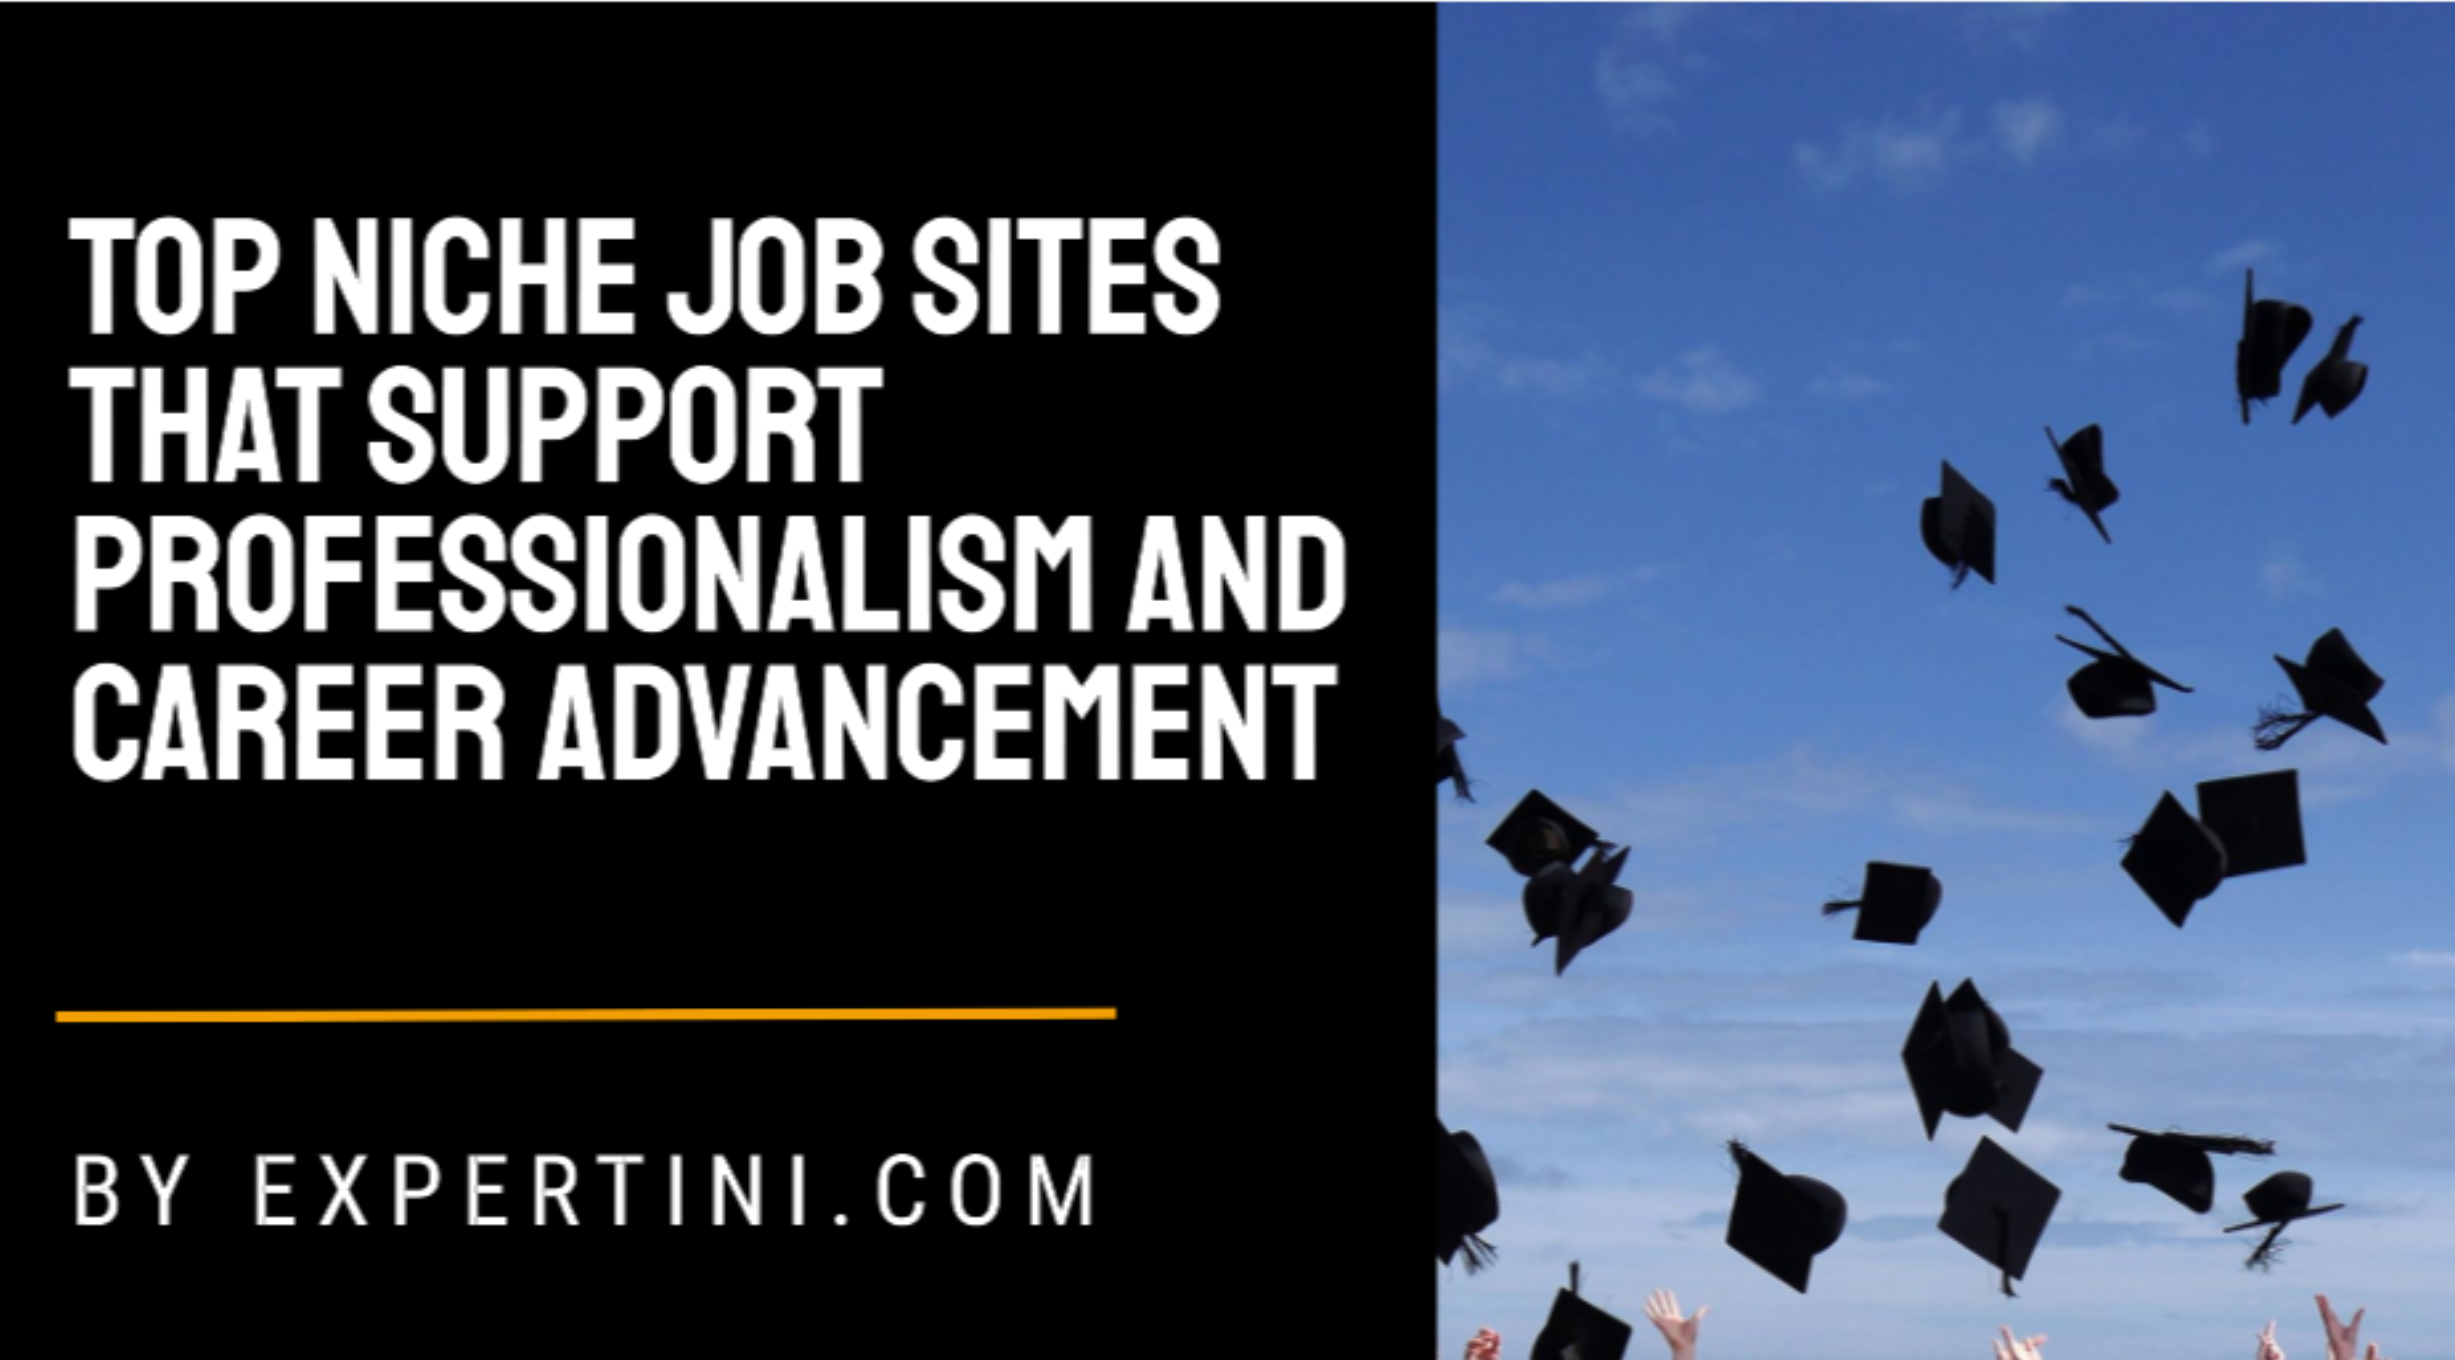 Top 275 Niche Job Sites That Support Professionalism and Career Advancement for United States